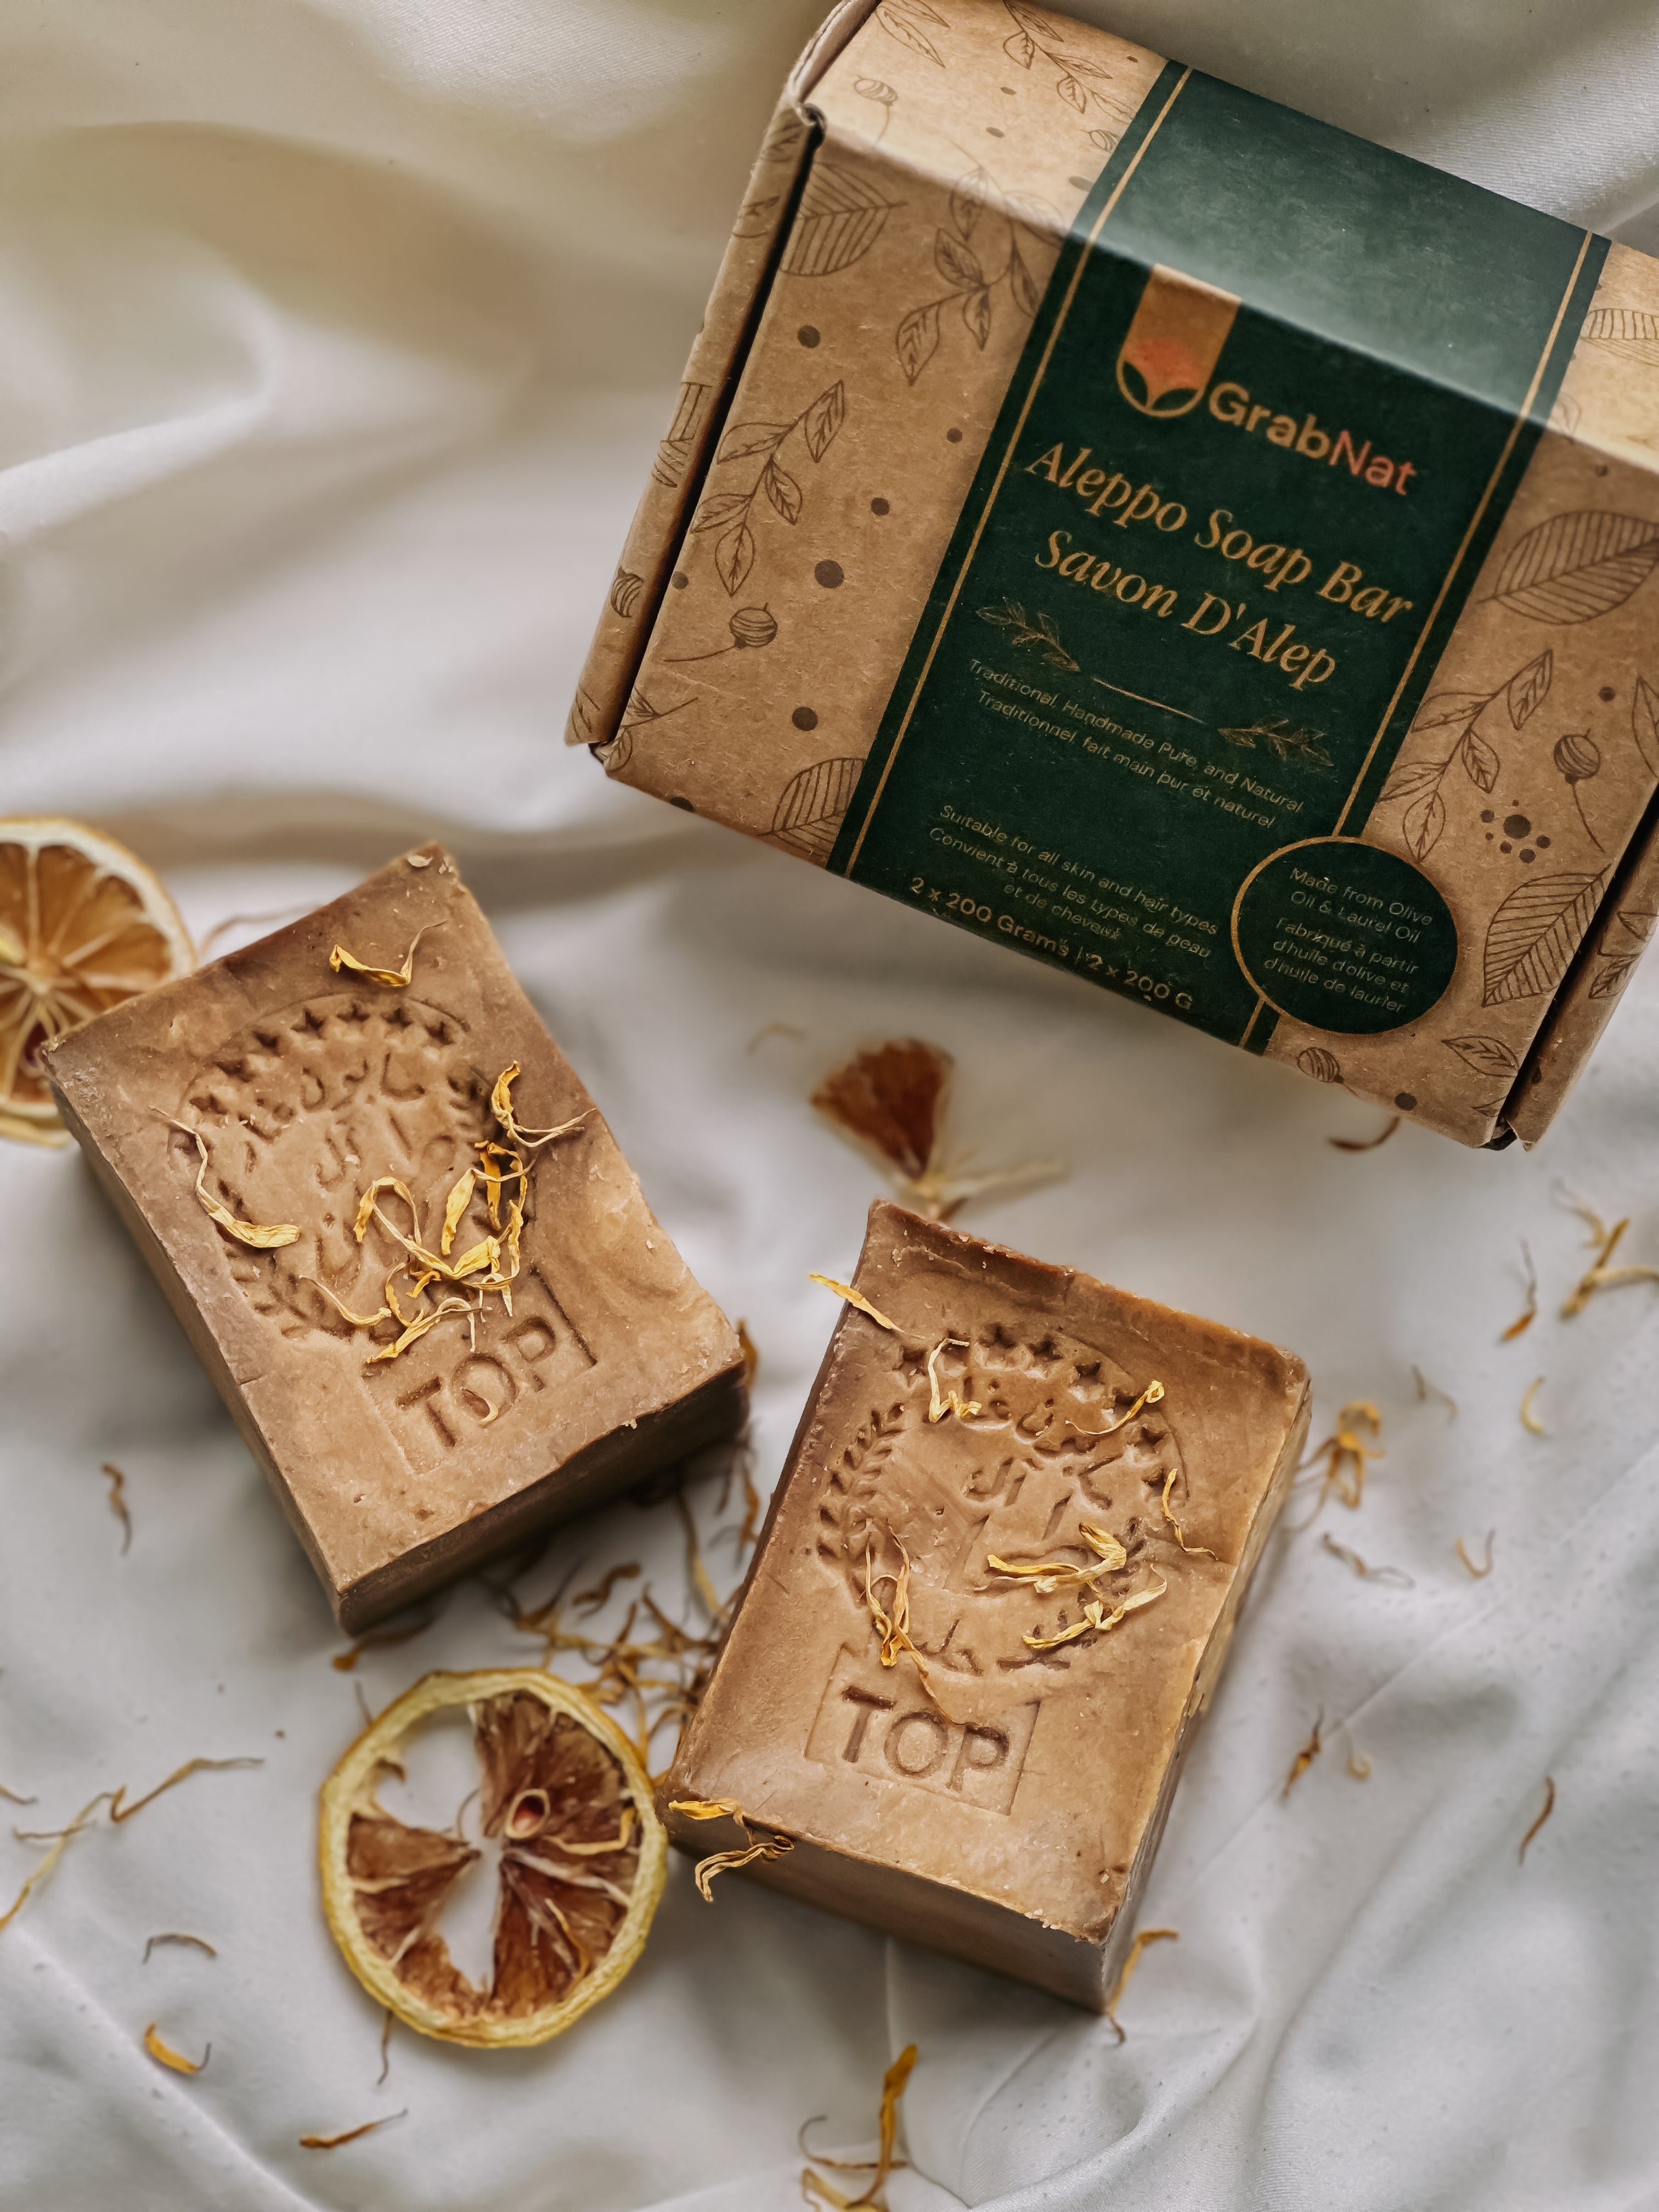 Authentic Aleppo Ghar Soap [Pack of 2]  - 2x180g - Enriched with Olive & Laurel Oils for Natural Skin Care